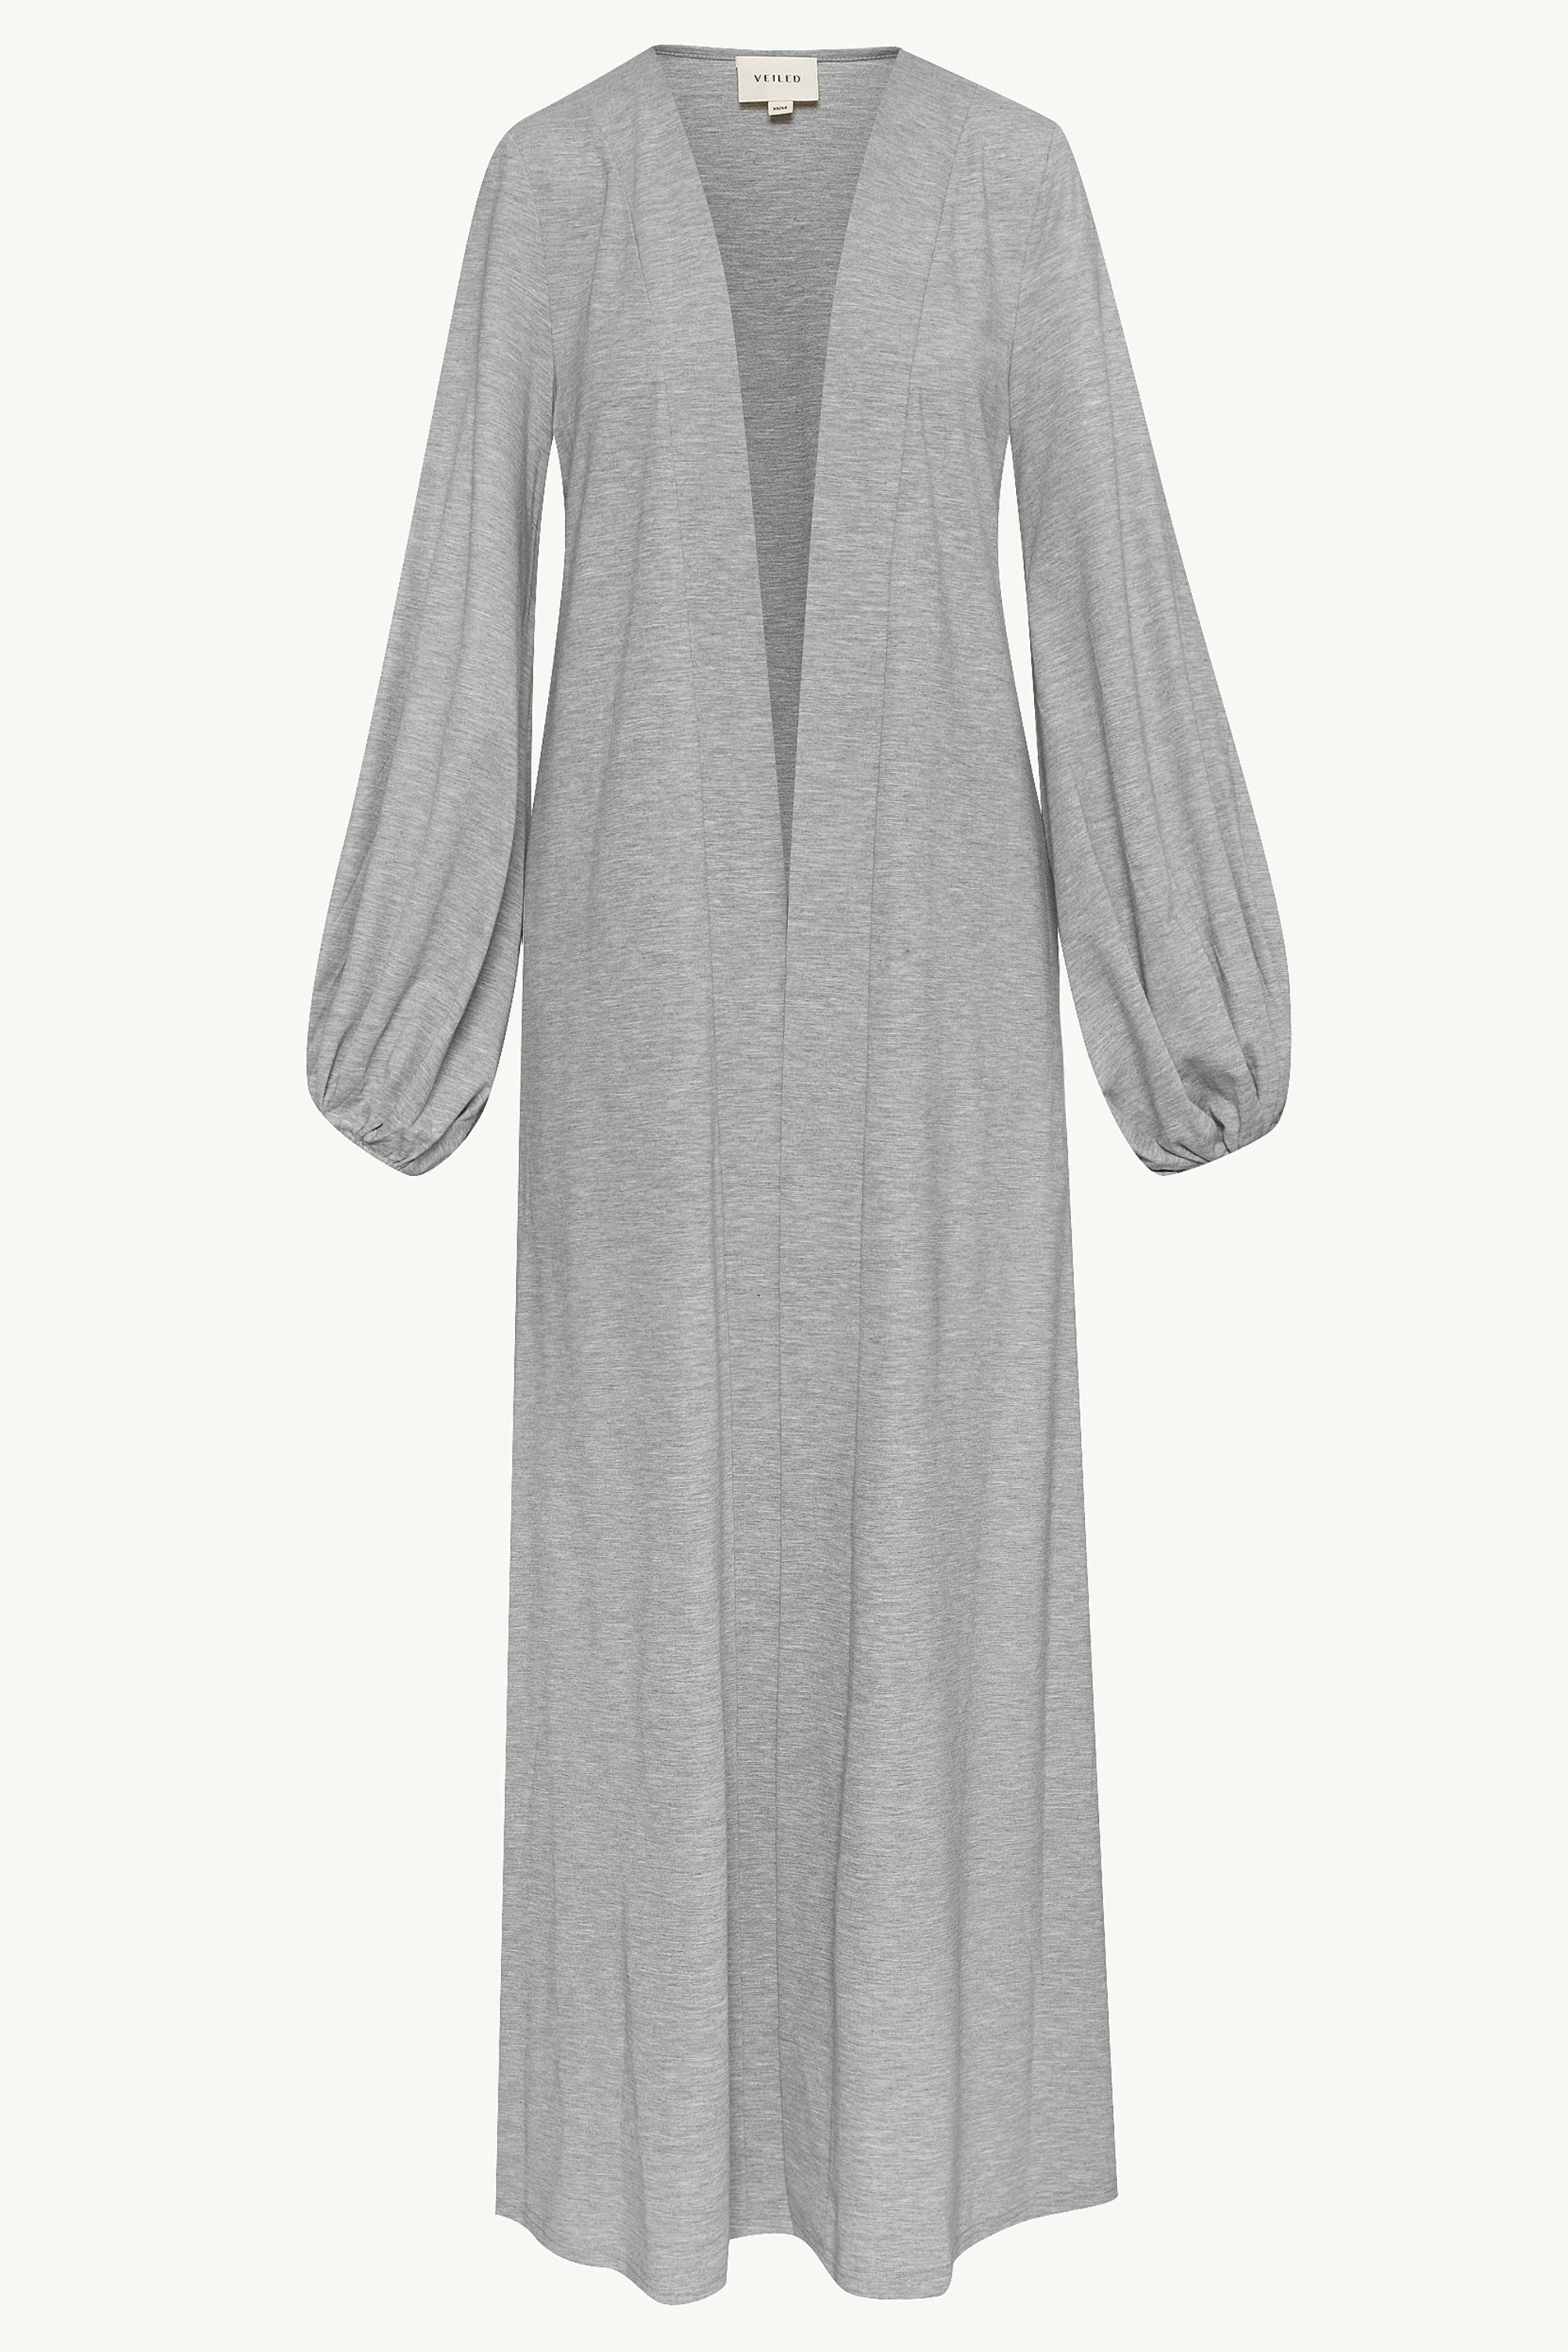 Essential Jersey Open Abaya - Heather Grey Clothing Veiled 